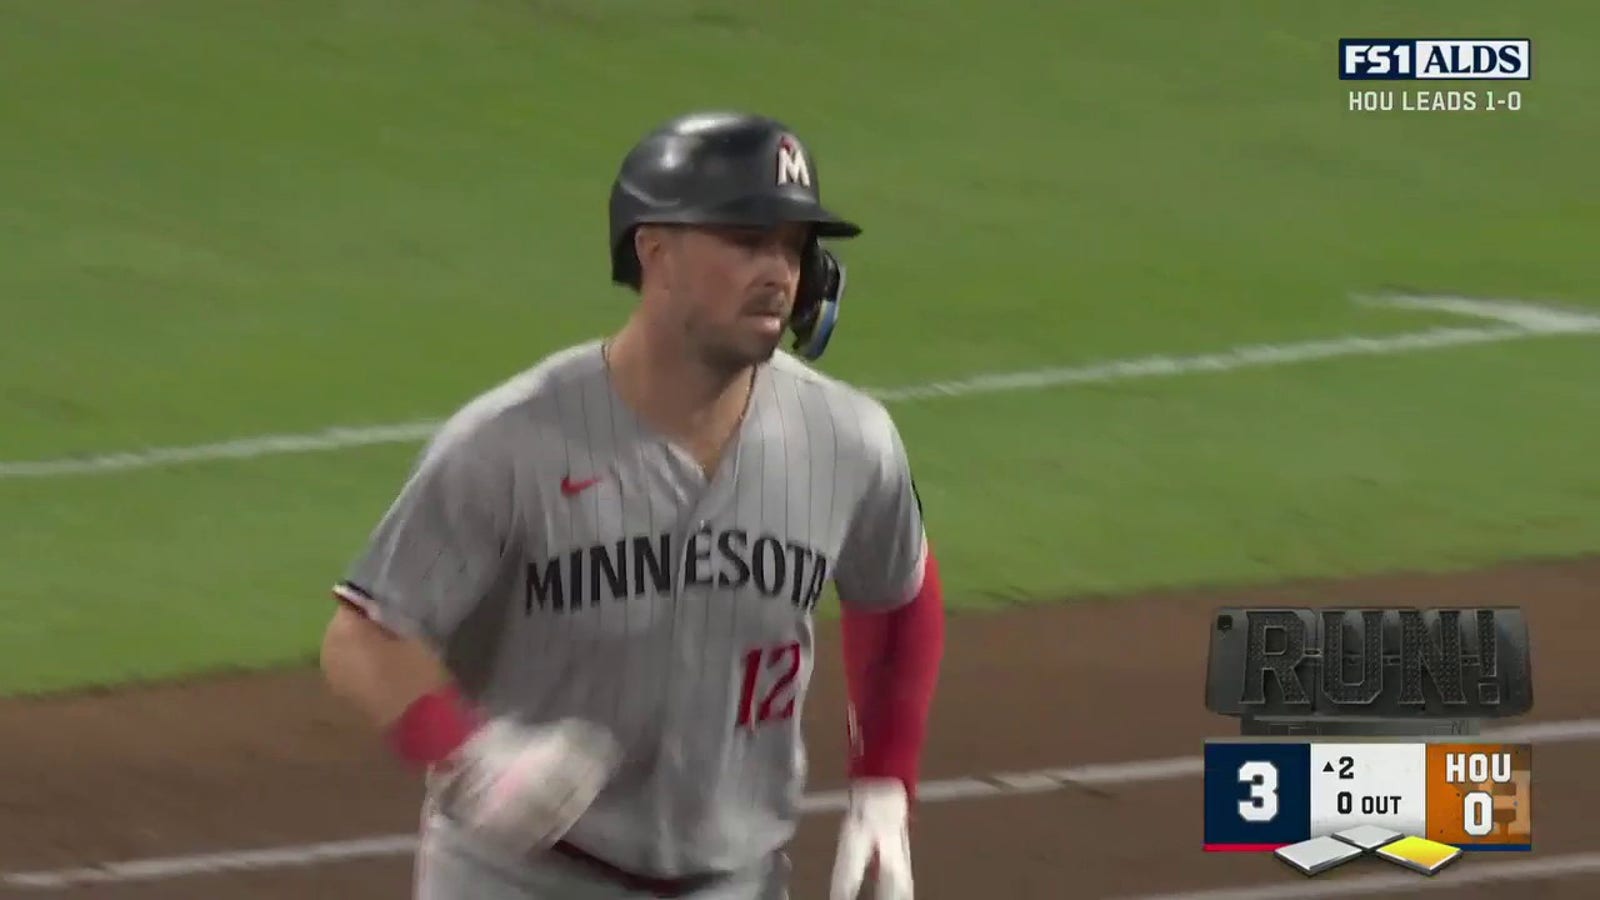 Kyle Farmer smashes a two-run homer, extending the Twins' lead over the Astros